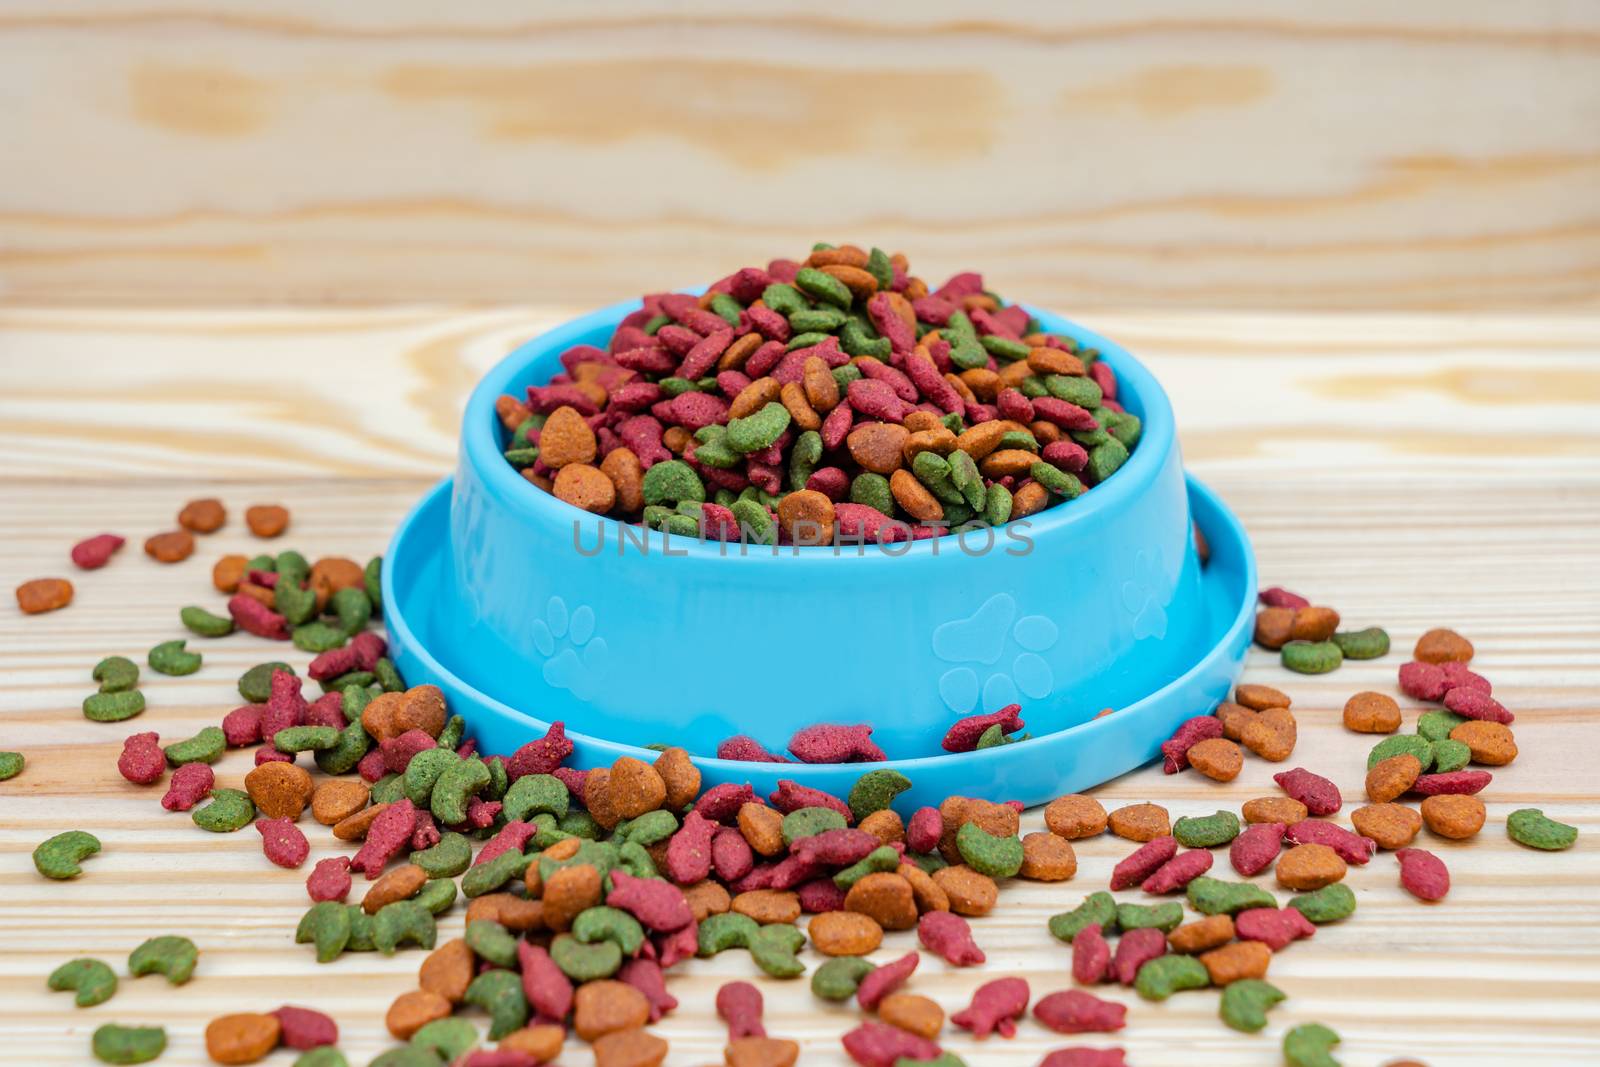 Pet food in bowl on wooden background by Buttus_casso